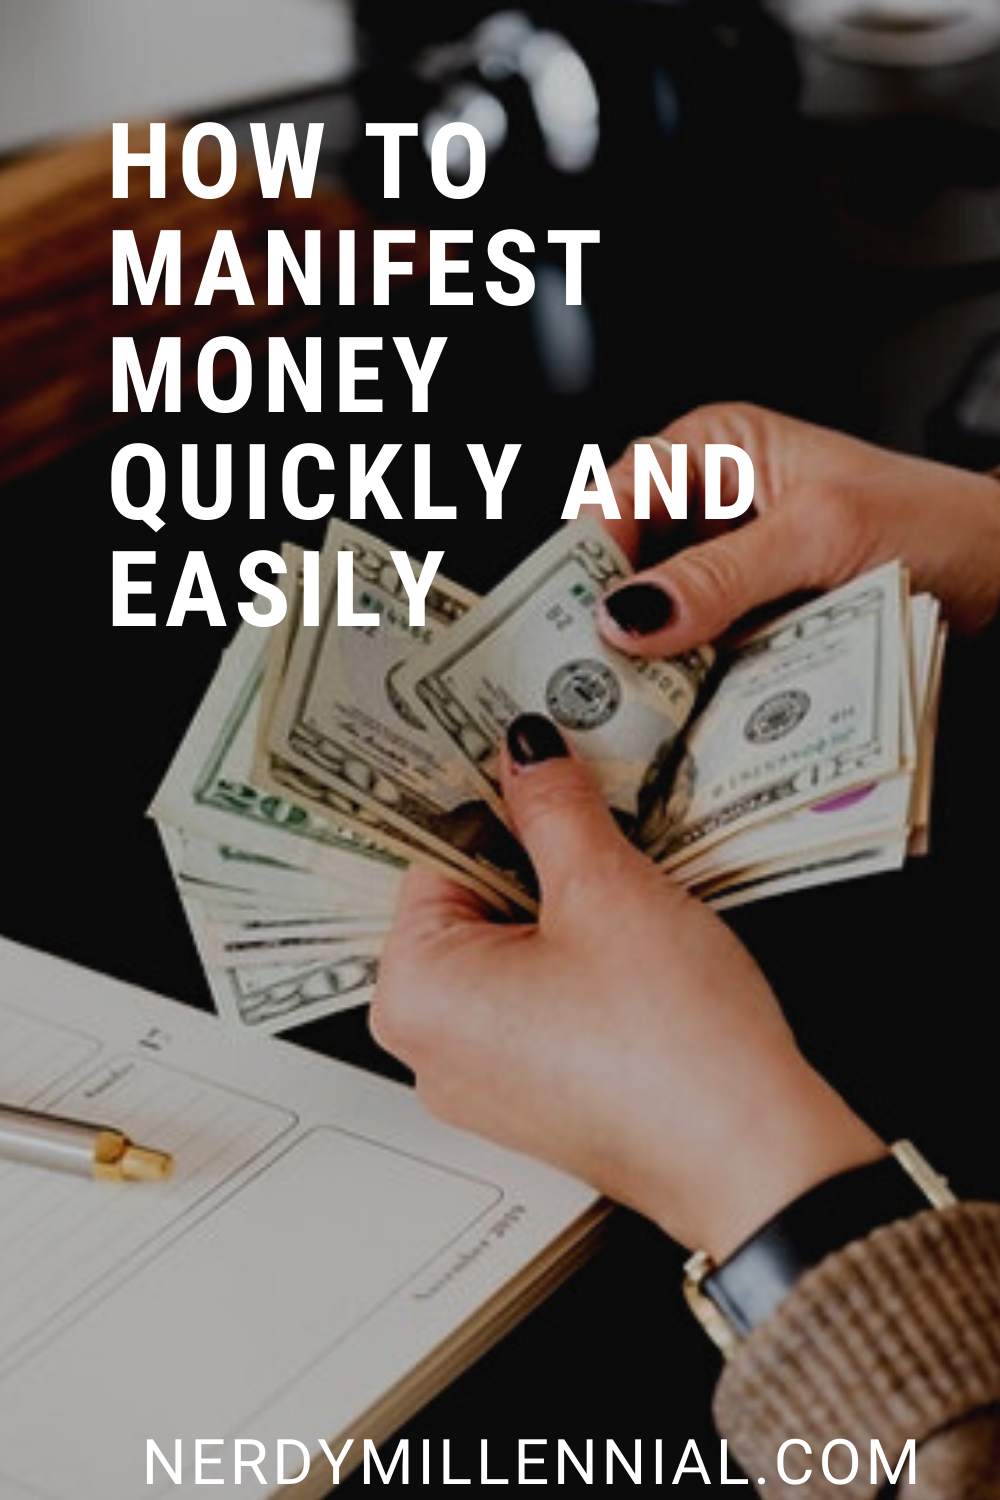 HOW TO MANIFEST MONEY QUICKLY AND EASILY